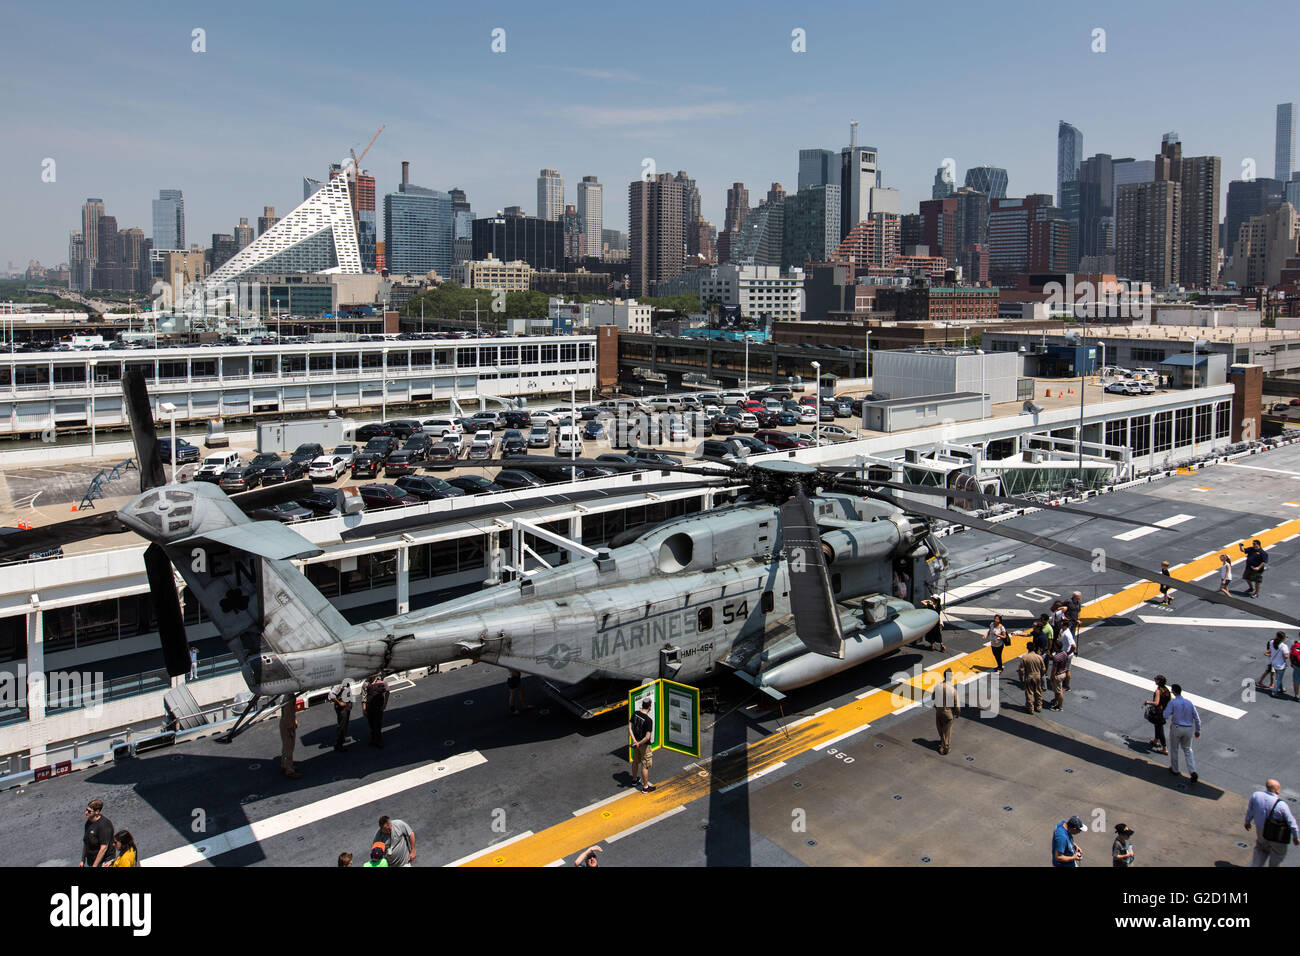 New York, USA. 27th May, 2016. New York, Pier 88 during the 28th Annual New York Fleet Week in New York. 27th May, 2016. A Sikorsky CH-53E Super Stallion helicopter is pictured on board the USS Bataan (LHD-5), Wasp-class amphibious assault ship, docked along Pier 88 during the 28th Annual New York Fleet Week in New York, the United States on May 27, 2016. New York Fleet Week takes place from May 25 to May 30, where hundred of service men and women in the Armed Forces visit New York City as part of Memorial Day commemorations. Credit:  Li Muzi/Xinhua/Alamy Live News Stock Photo